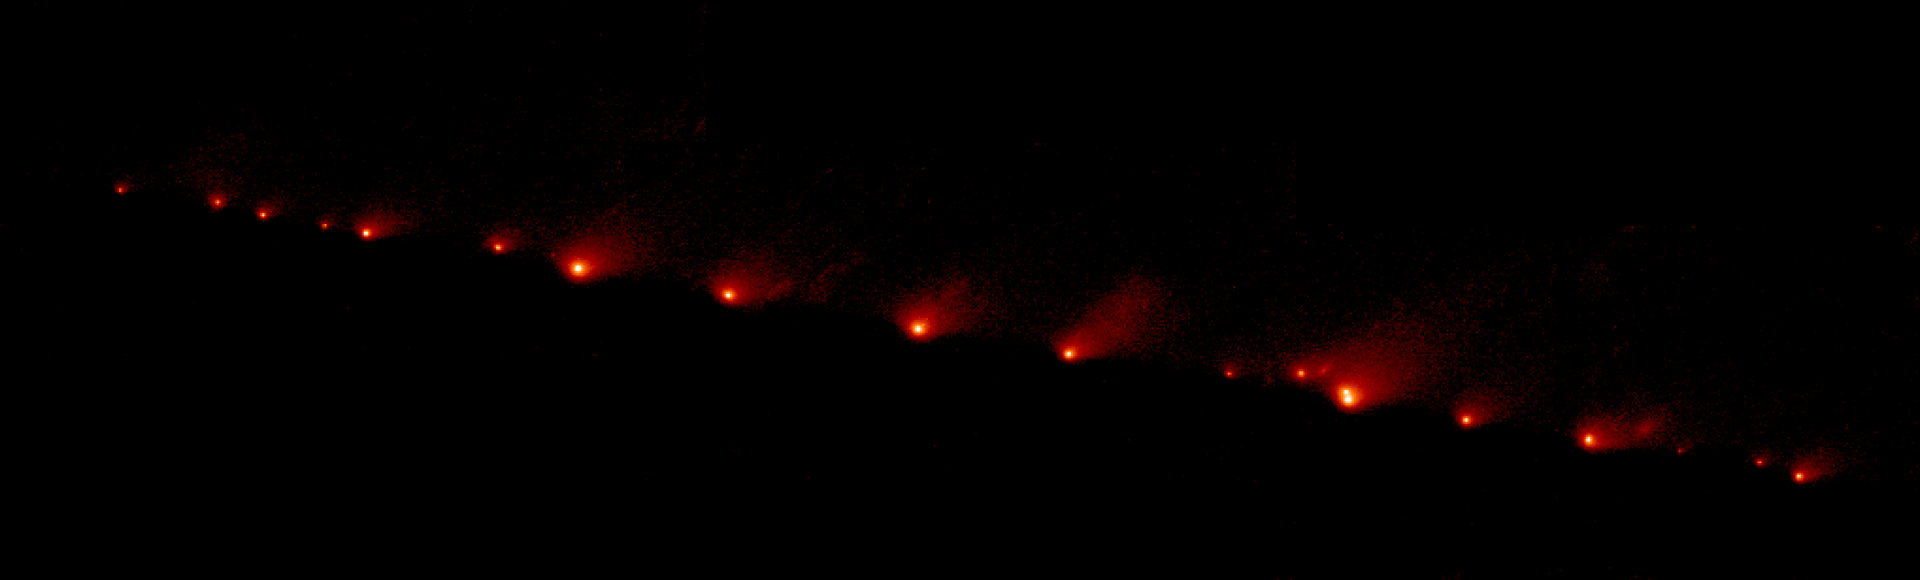 Fragments of Shoemaker Levy-9 upon collision with Jupiter